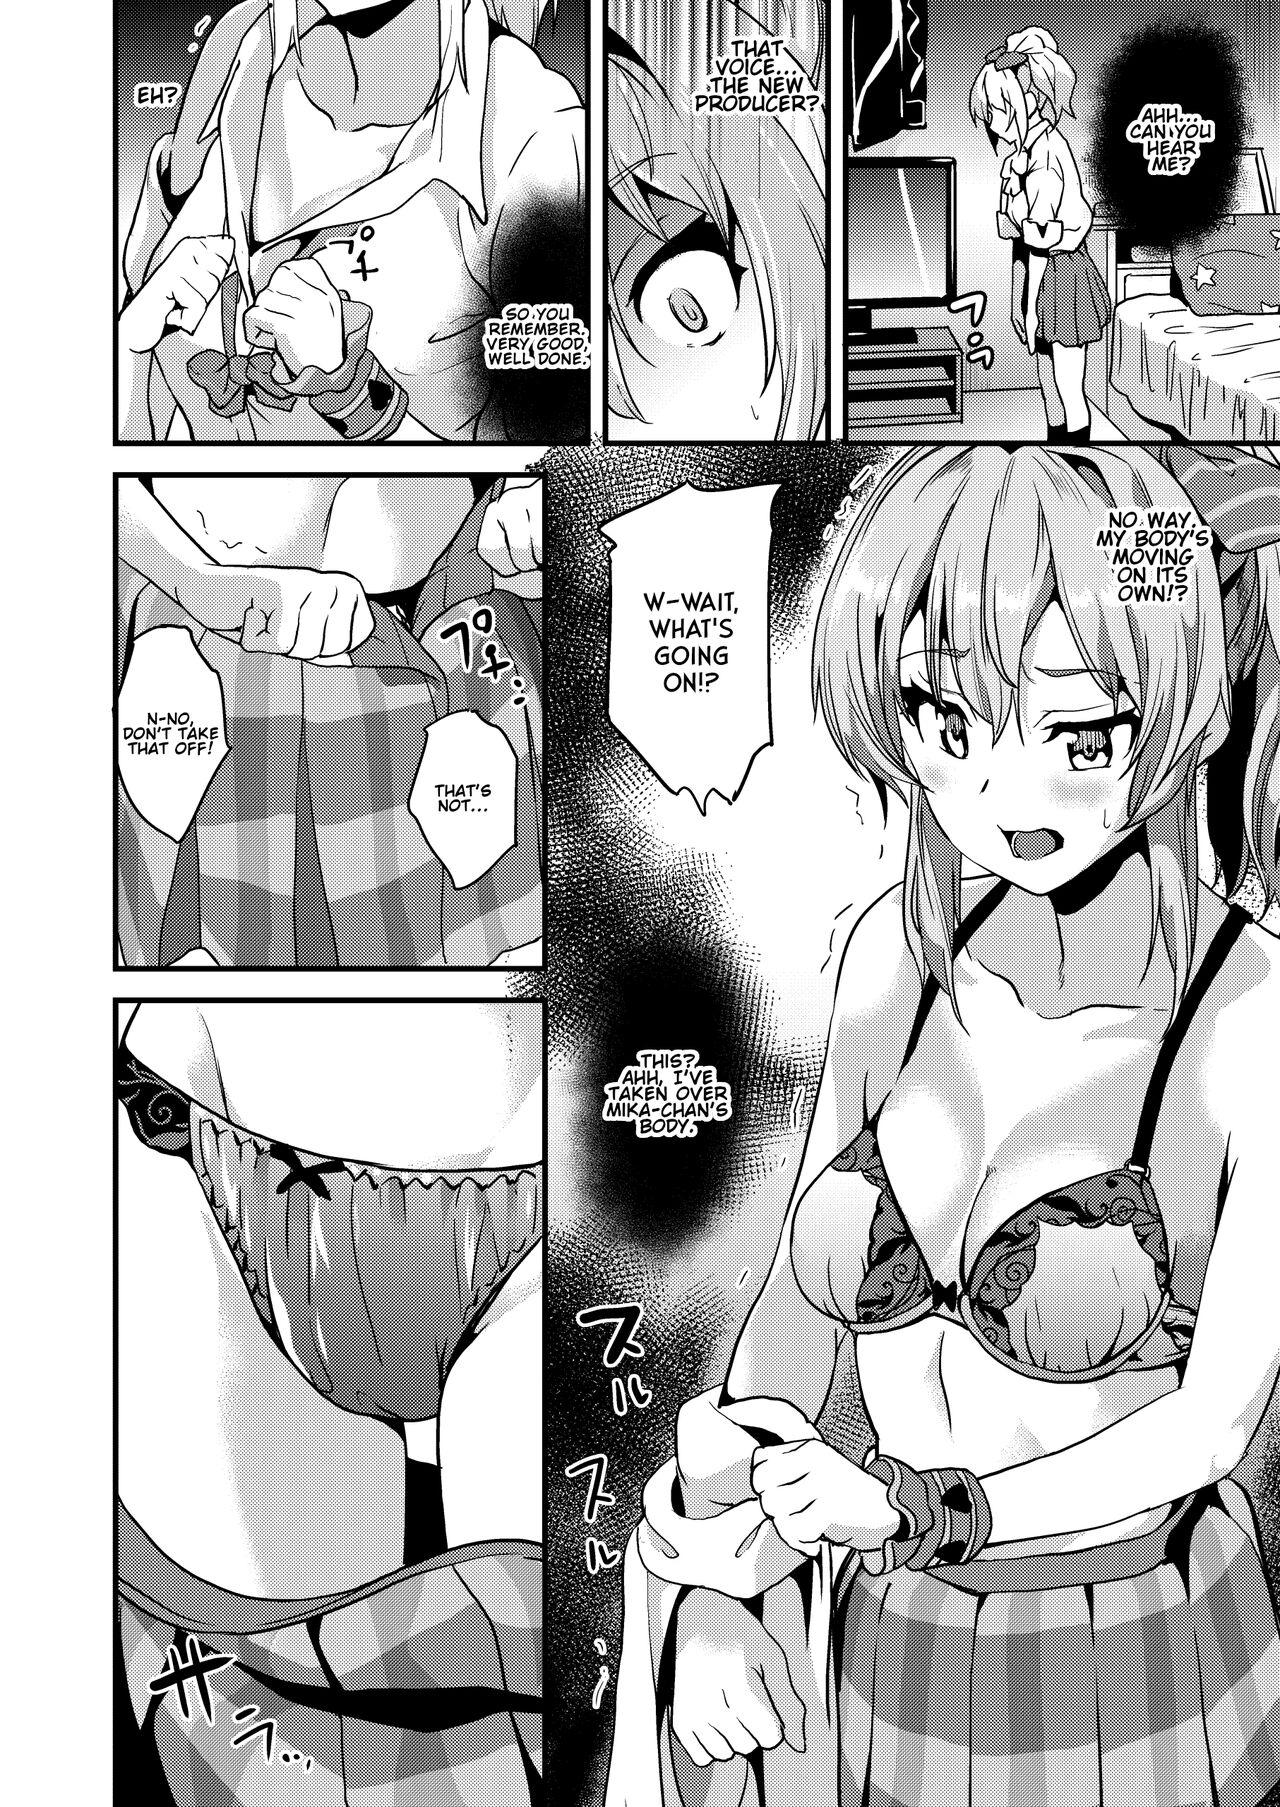 Exhib DOUBLE BIND - The idolmaster One - Page 5